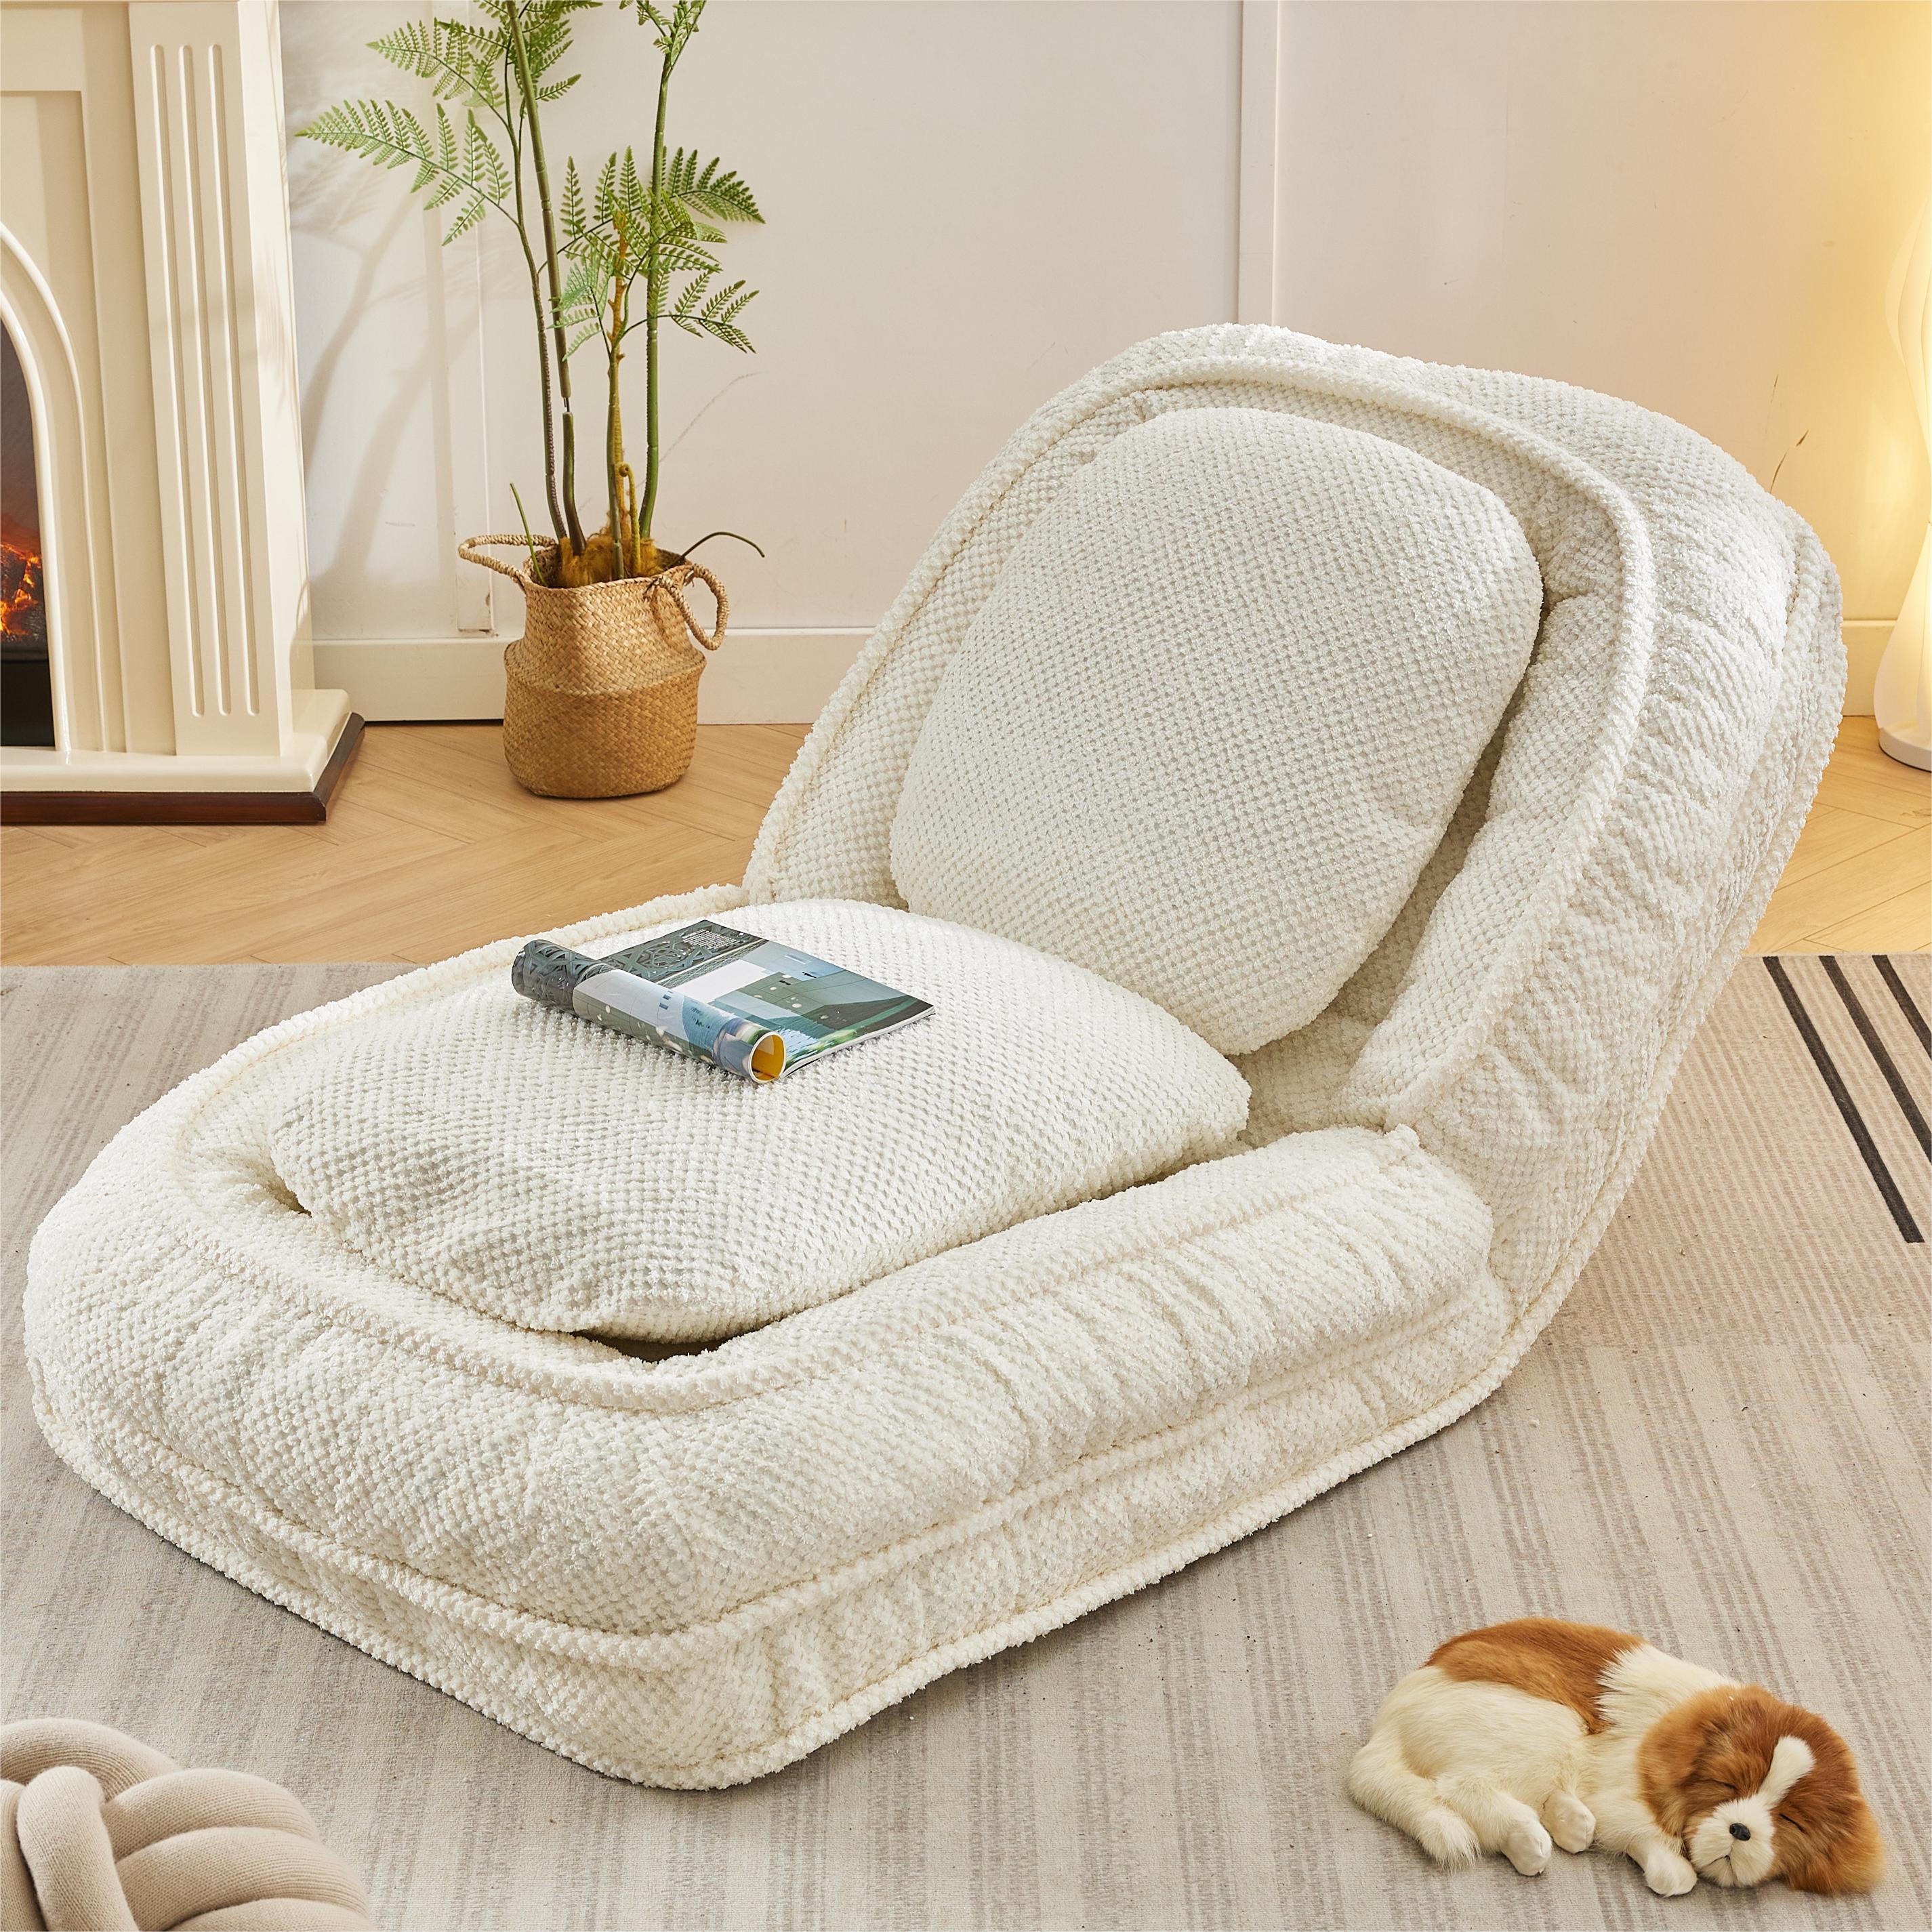 🆓🚛 Human Dog Bed, Lazy Sofa Couch, 5 Adjustable Position, Sit, Sleep, Fold, Suit To Put In Bedroom, Living Room, Space Saving Design, White